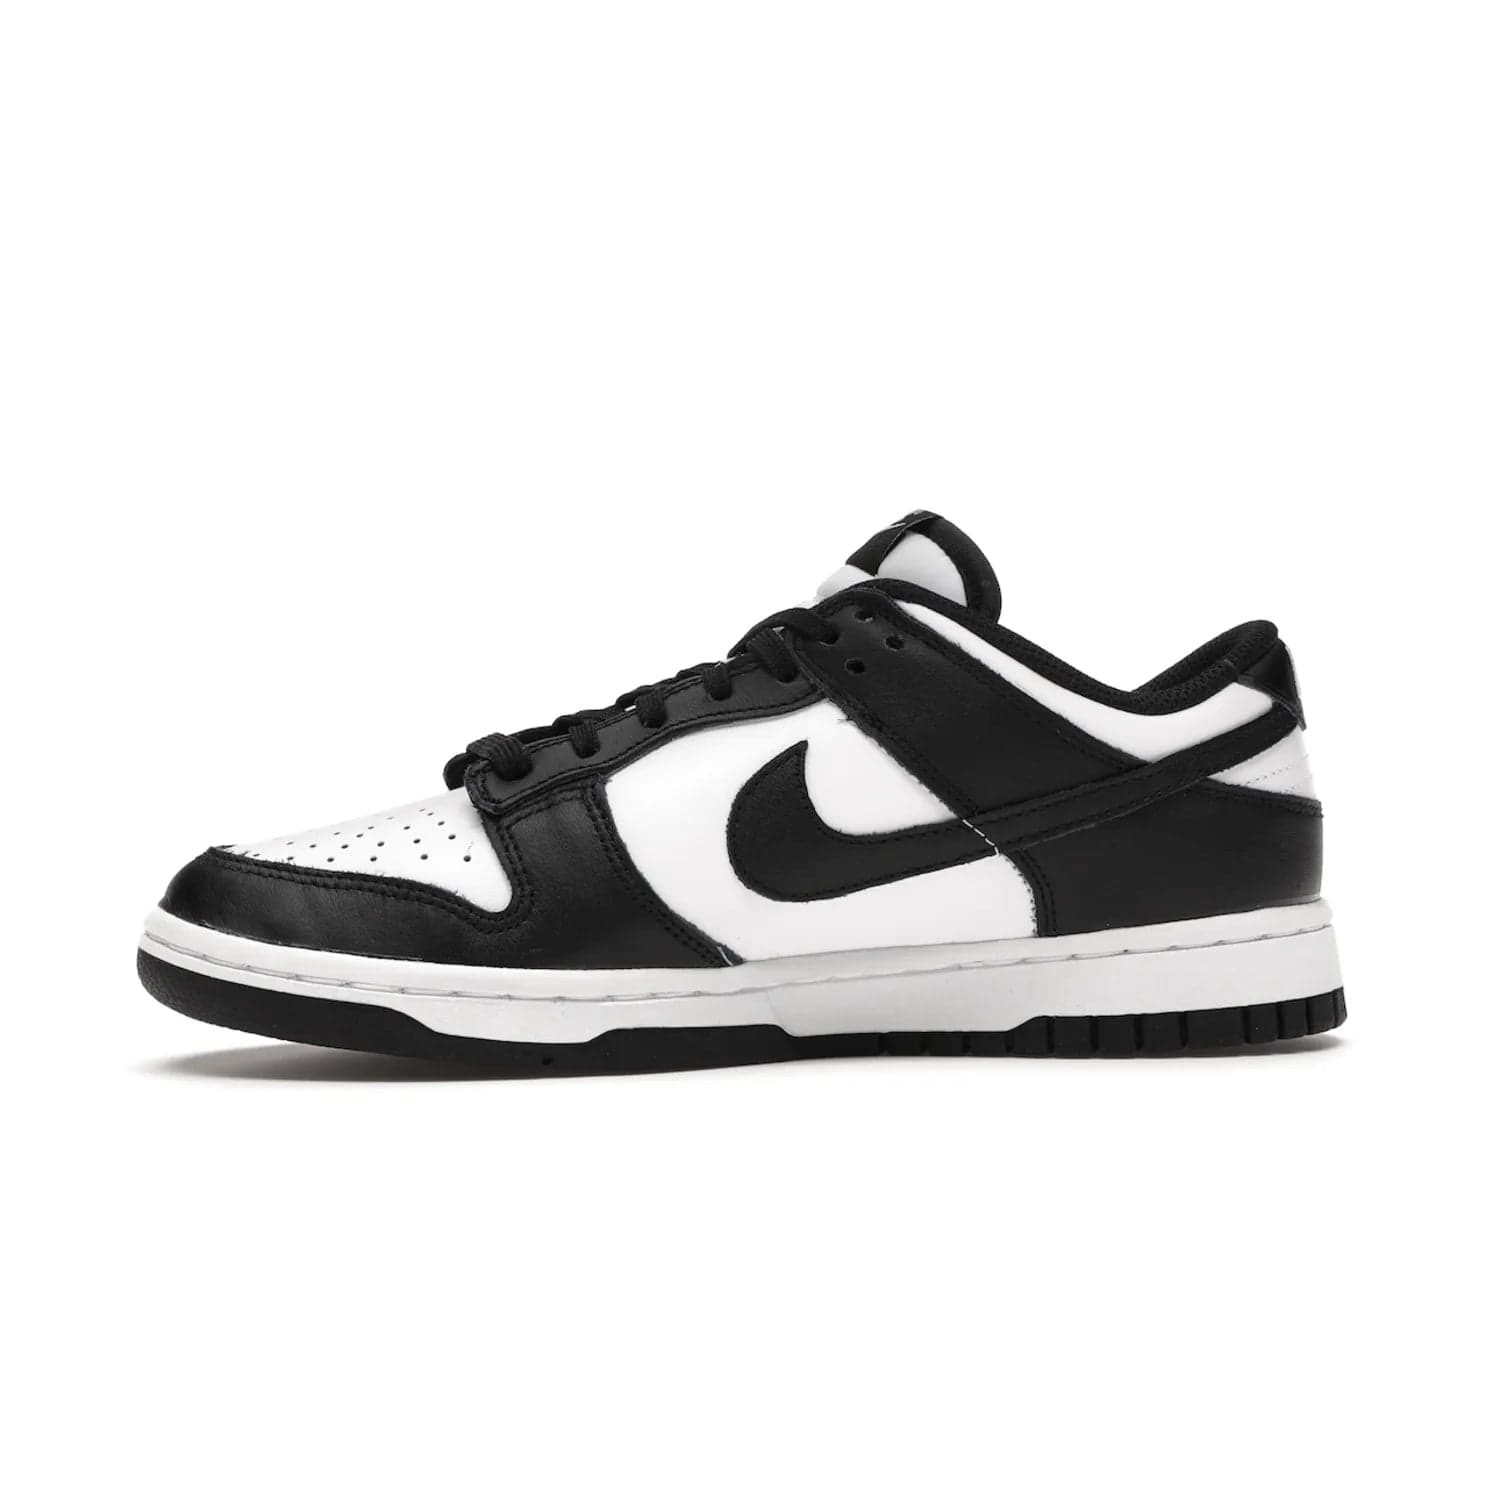 Nike Dunk Low Retro White Black Panda (2021) (Women's) - Image 18 - Only at www.BallersClubKickz.com - Say hello to the new Nike Dunk Low Retro White Black Panda (2021) (Women's)! White & black leather upper with Nike Swoosh logo. Get your pair for $100 in March 2021! Shop now!